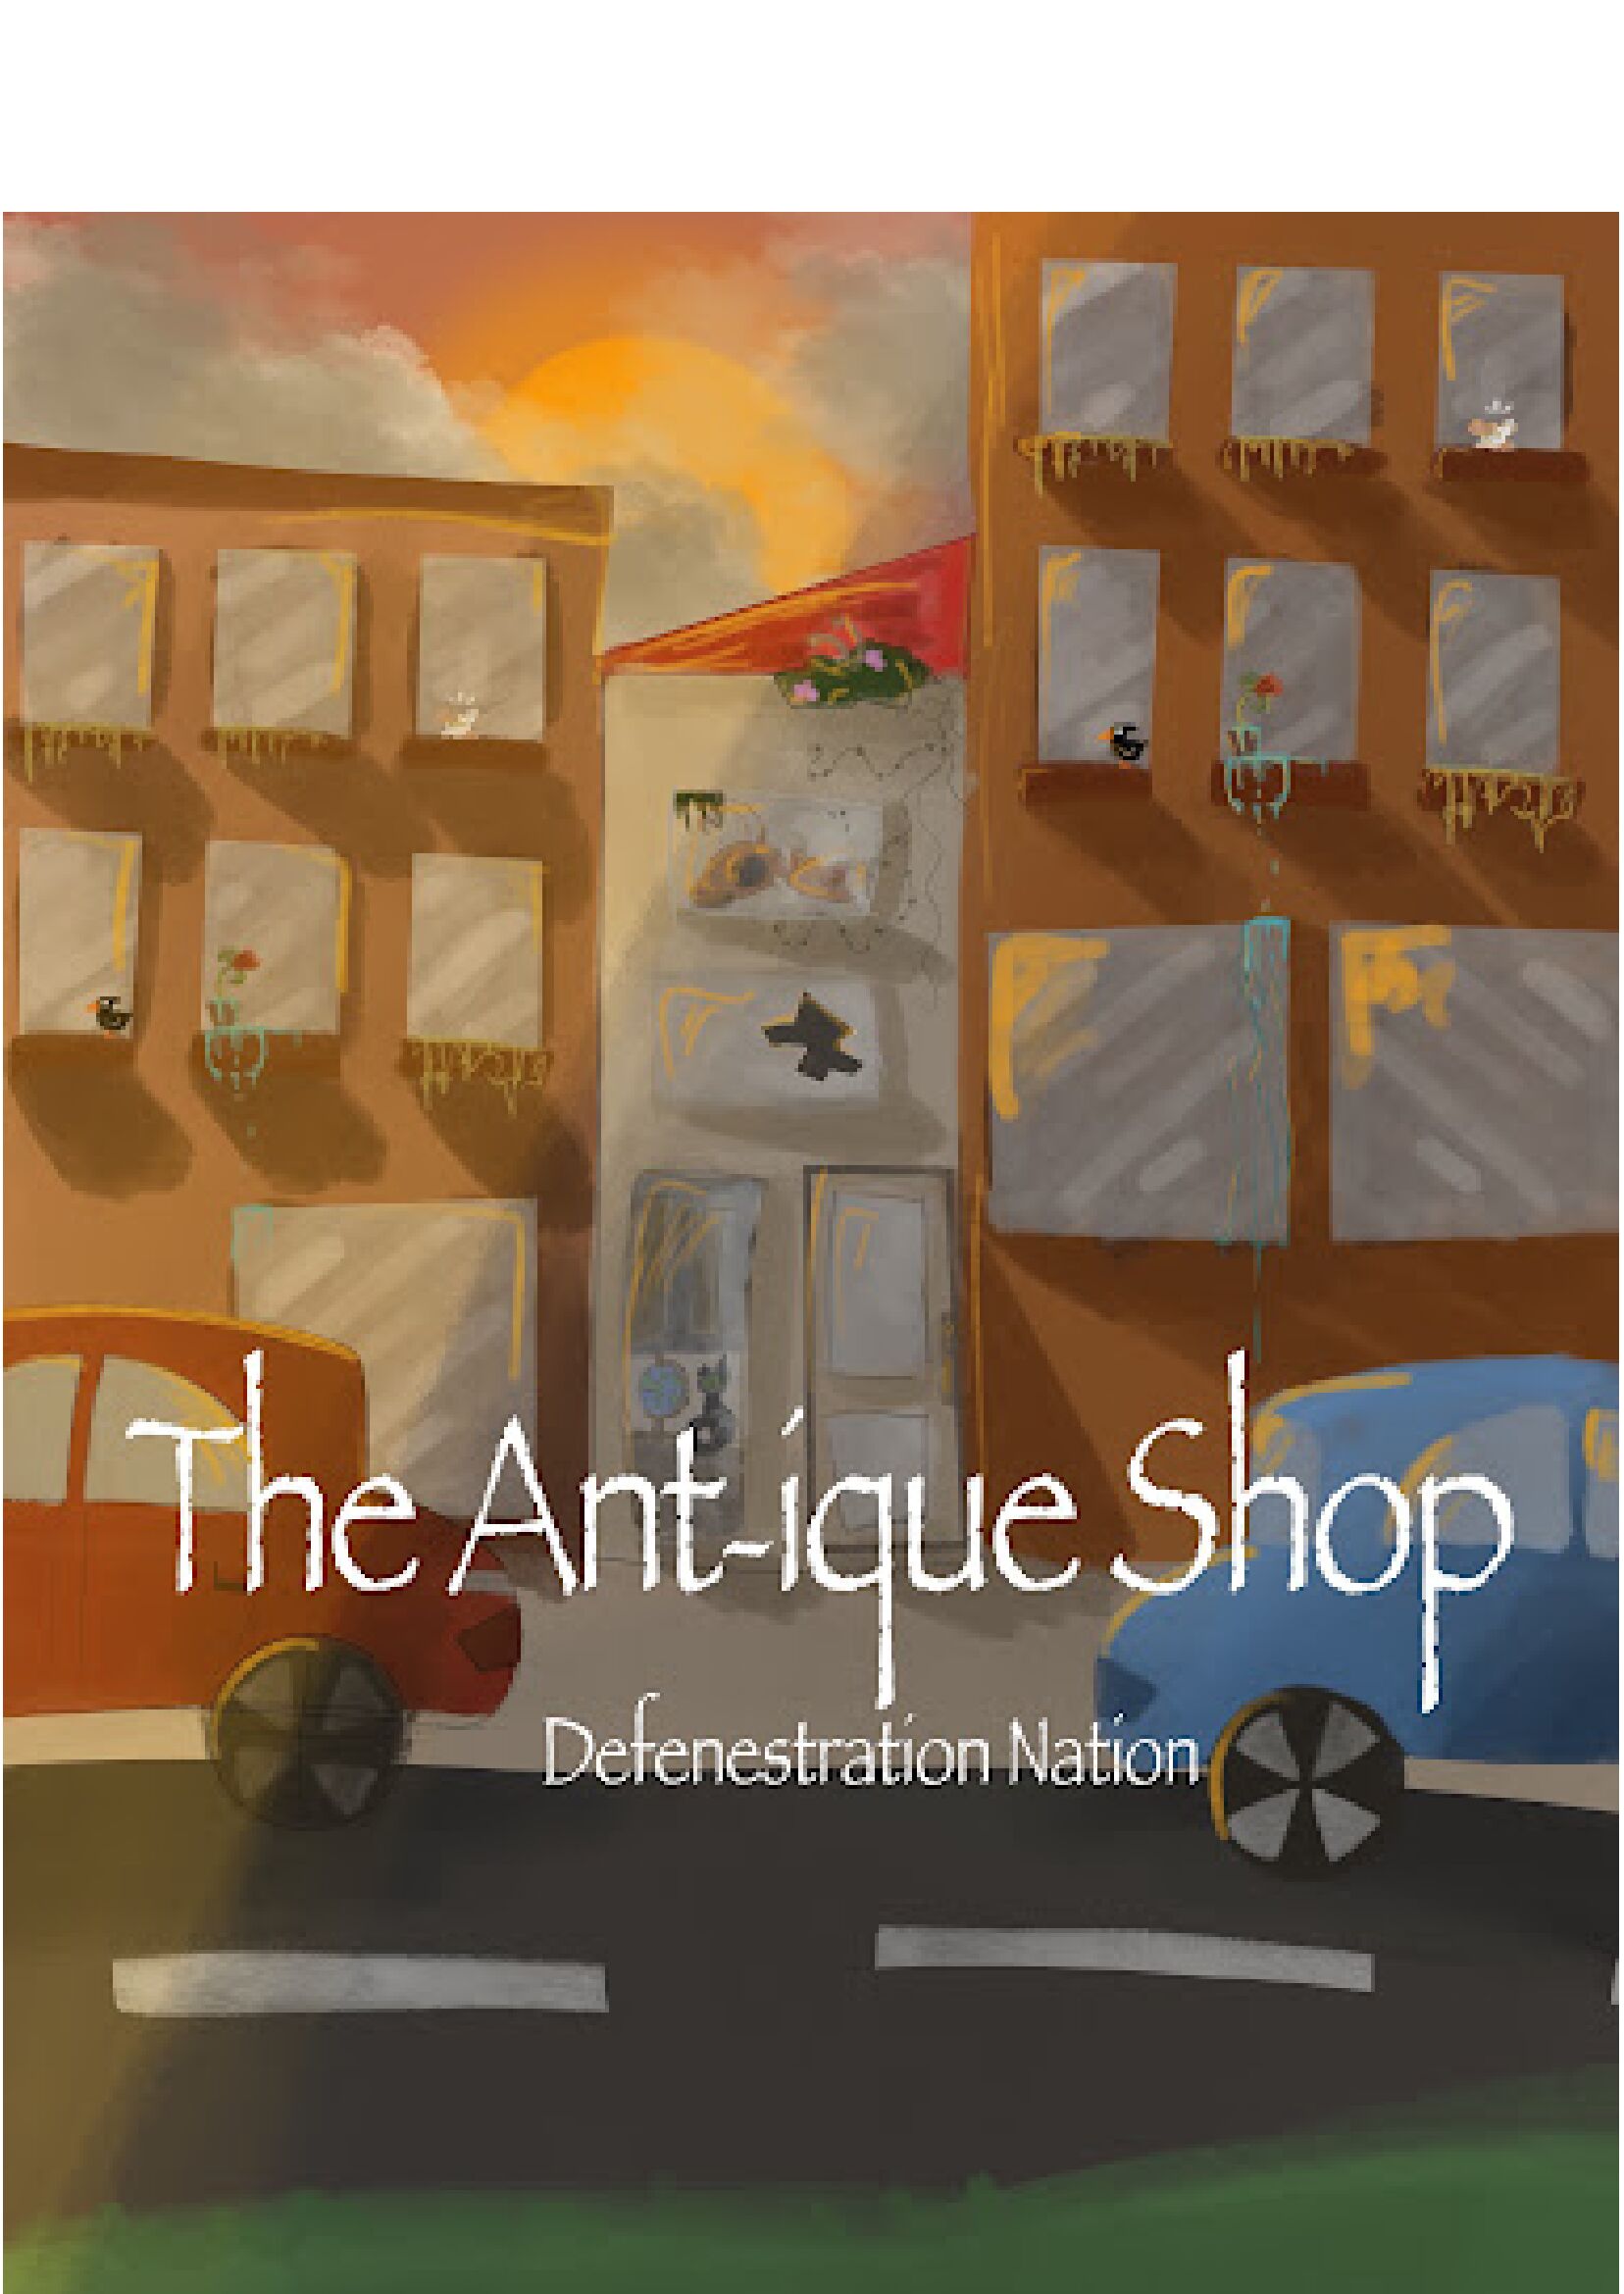 The Ant-ique Shop